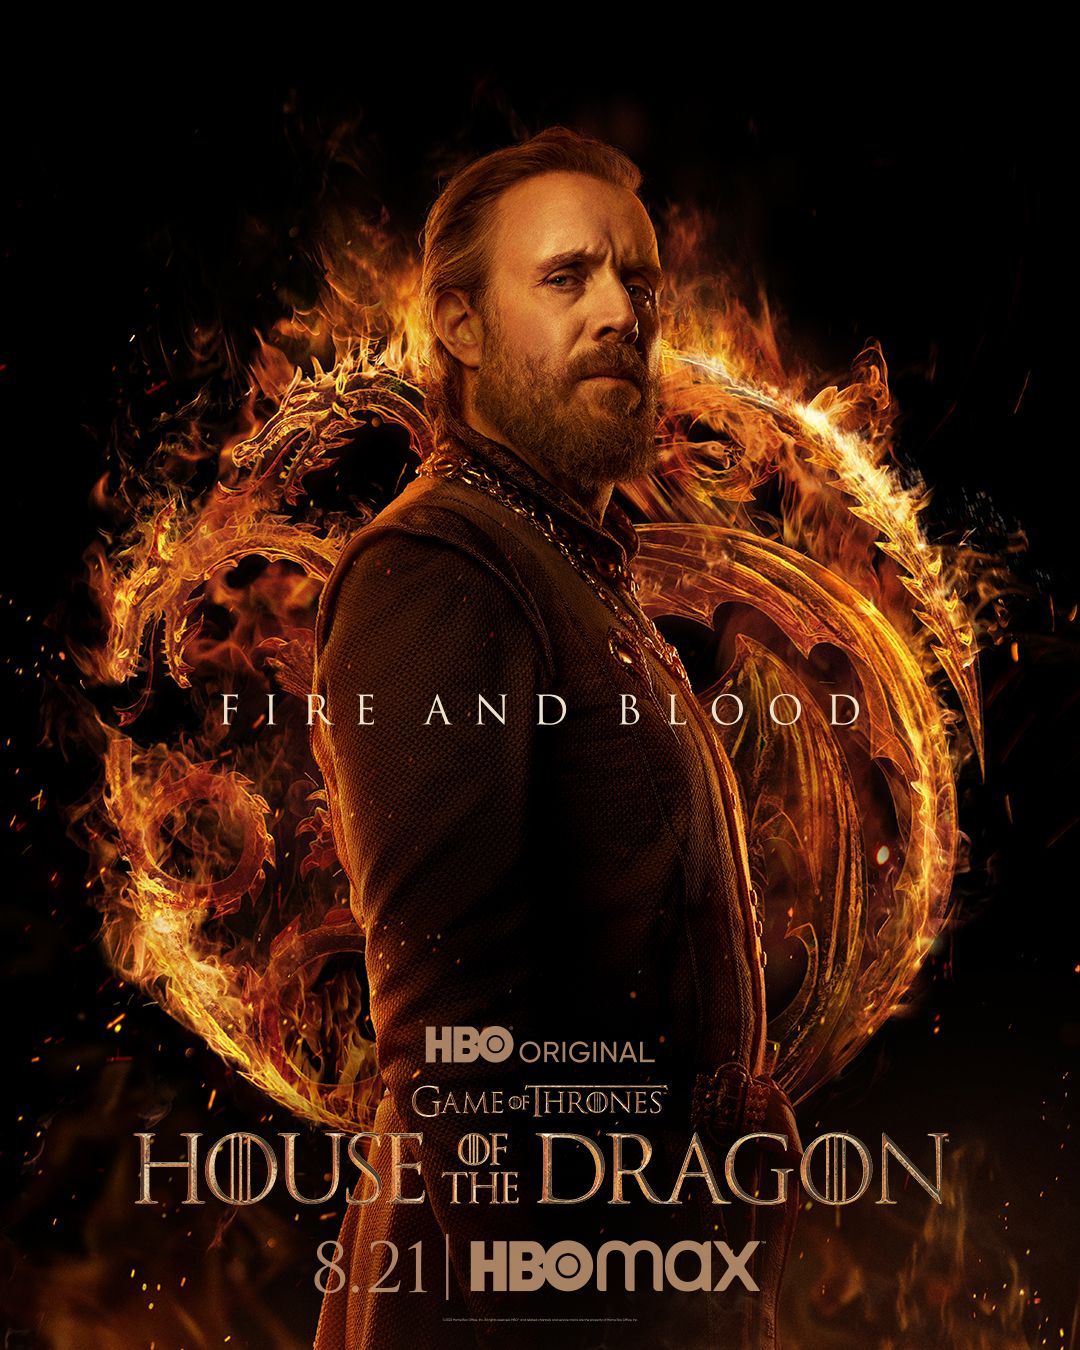 House of the Dragon Release Date, Trailer, Story & News to Know